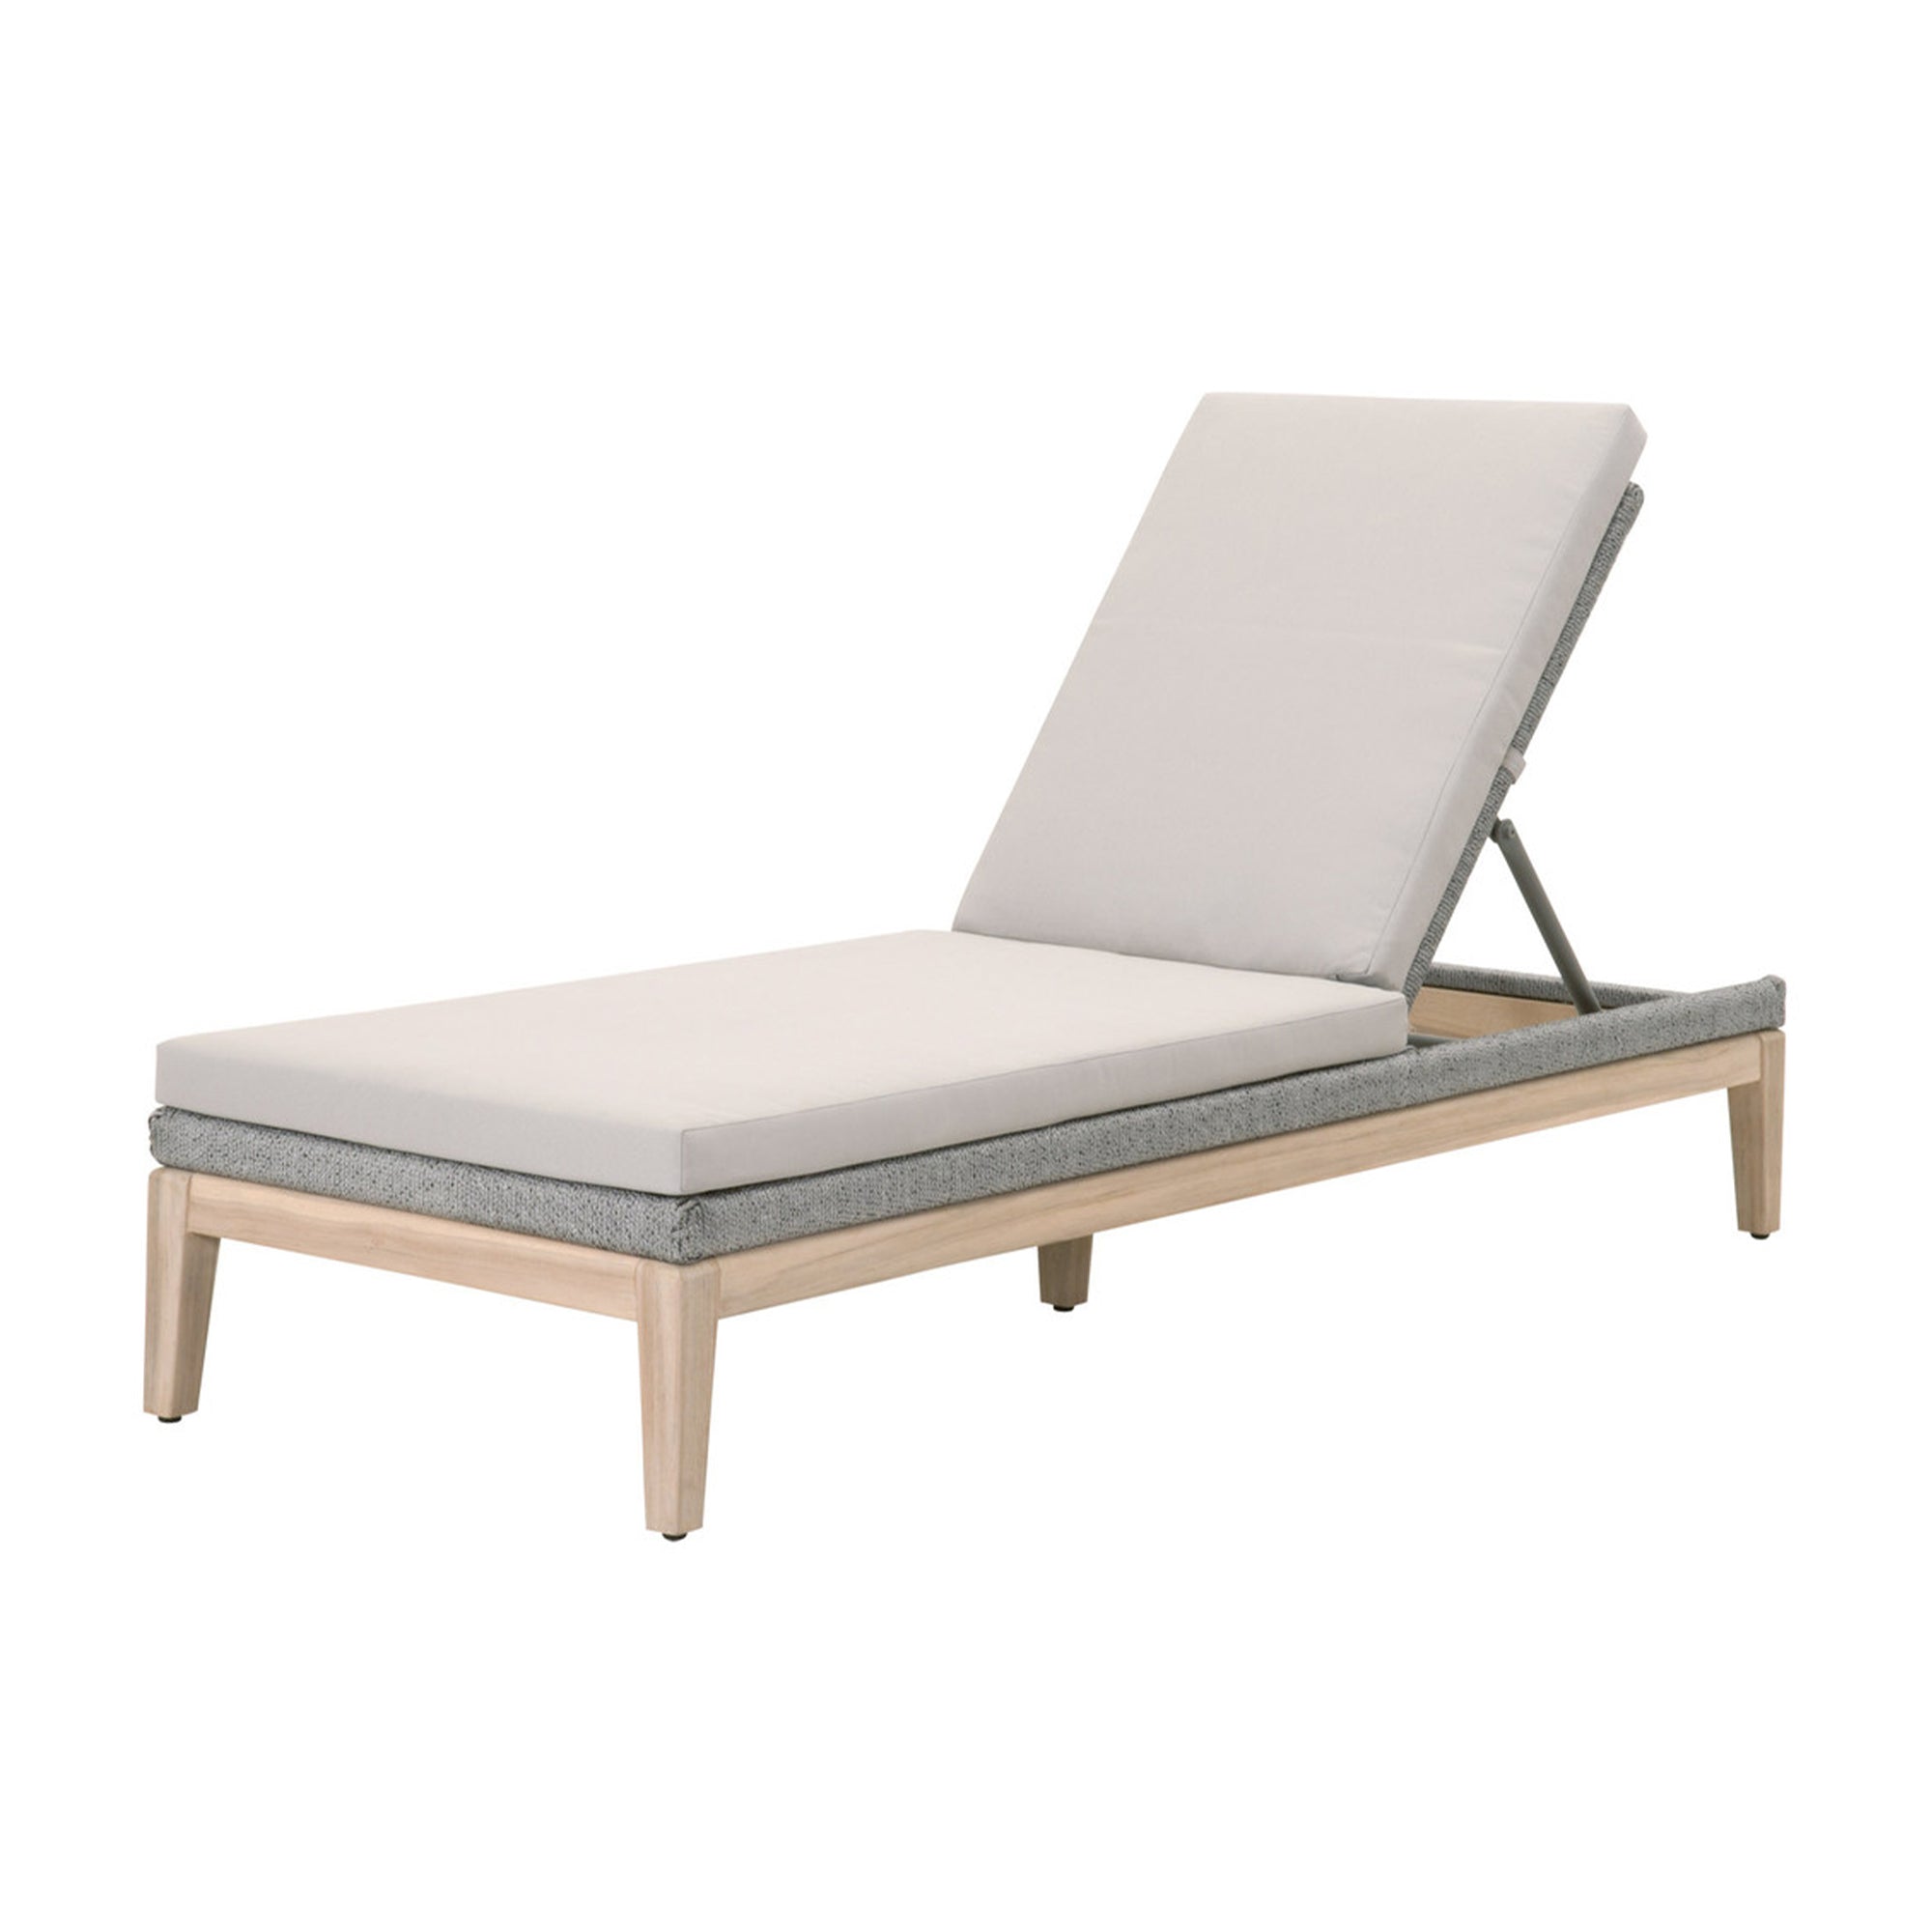 Loom Outdoor Chaise Lounge